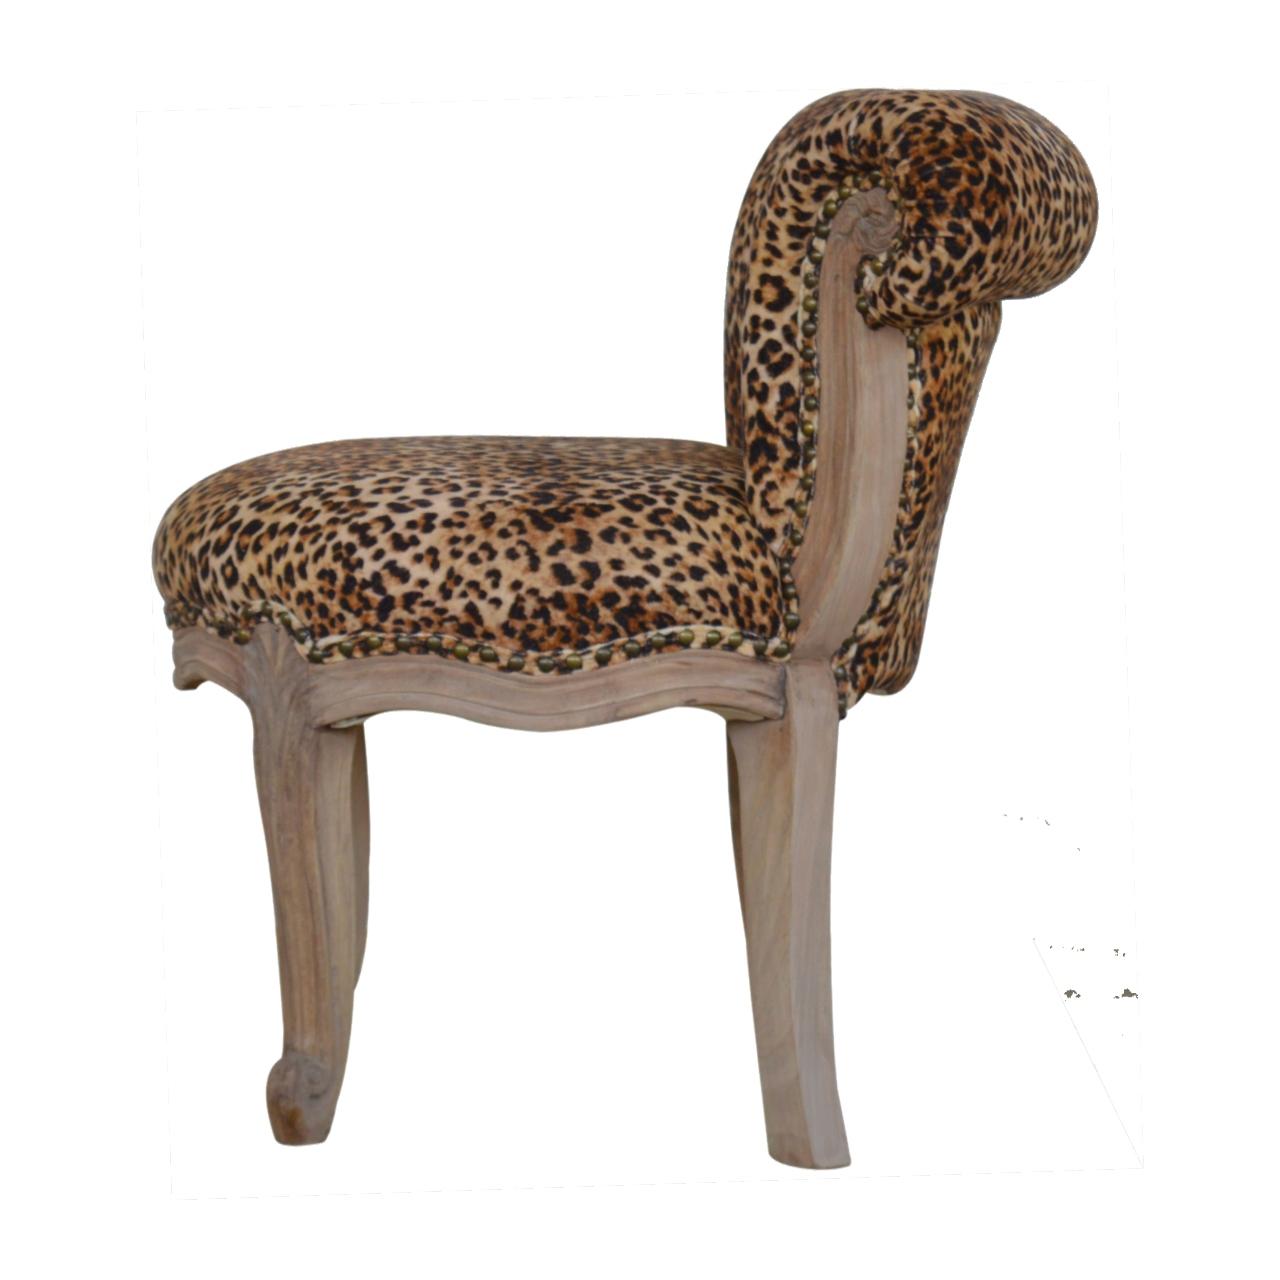 Leopard Print Studded Chair with Cabriole Legs